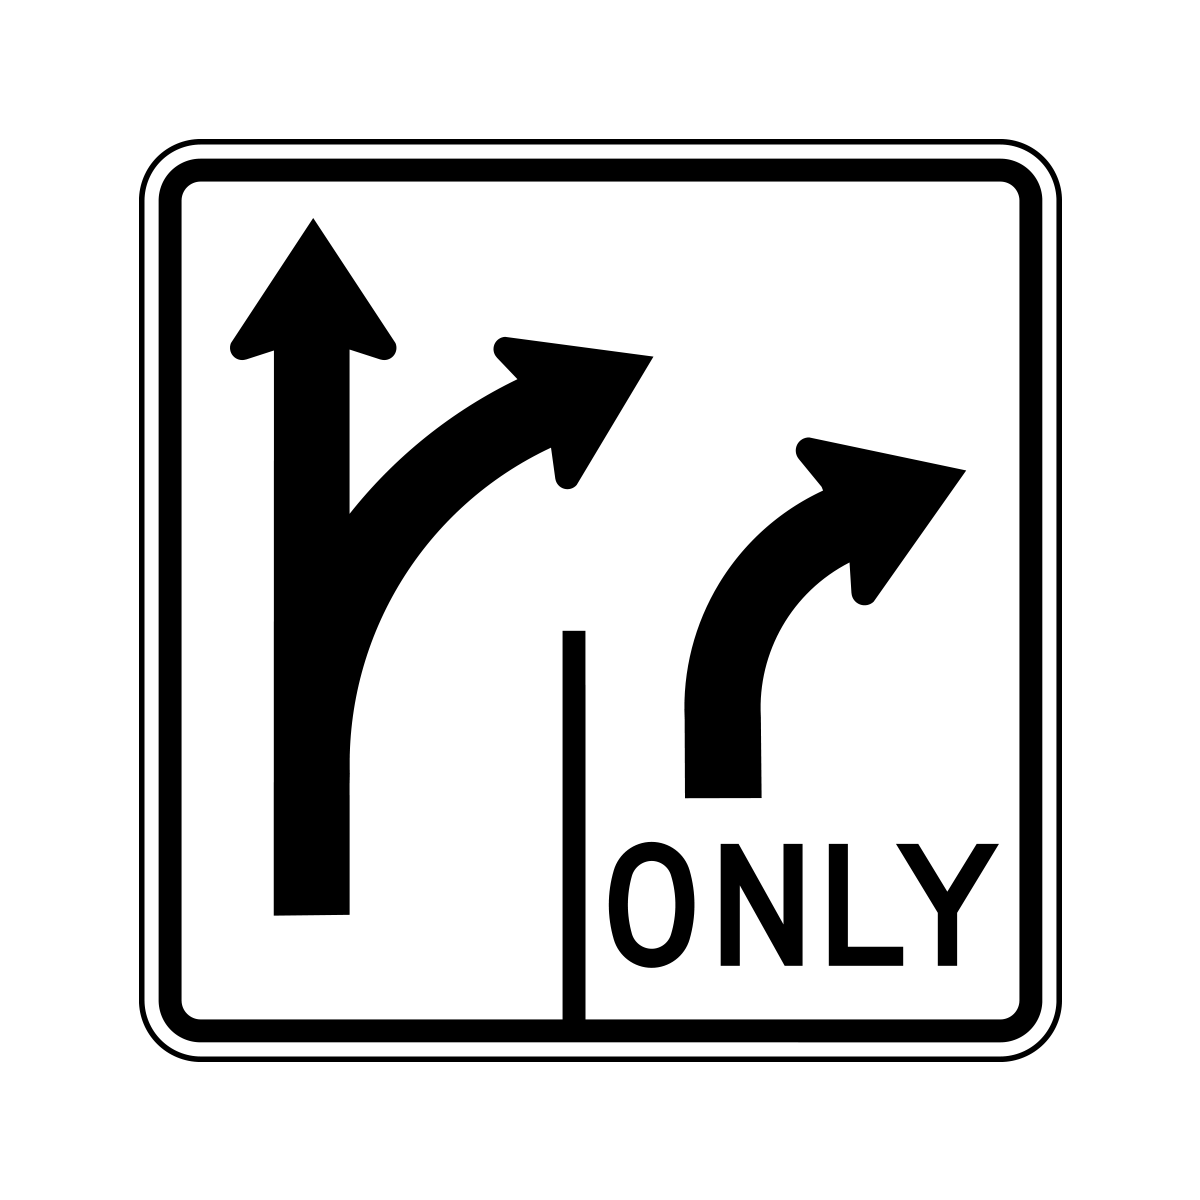 Double Turn Right